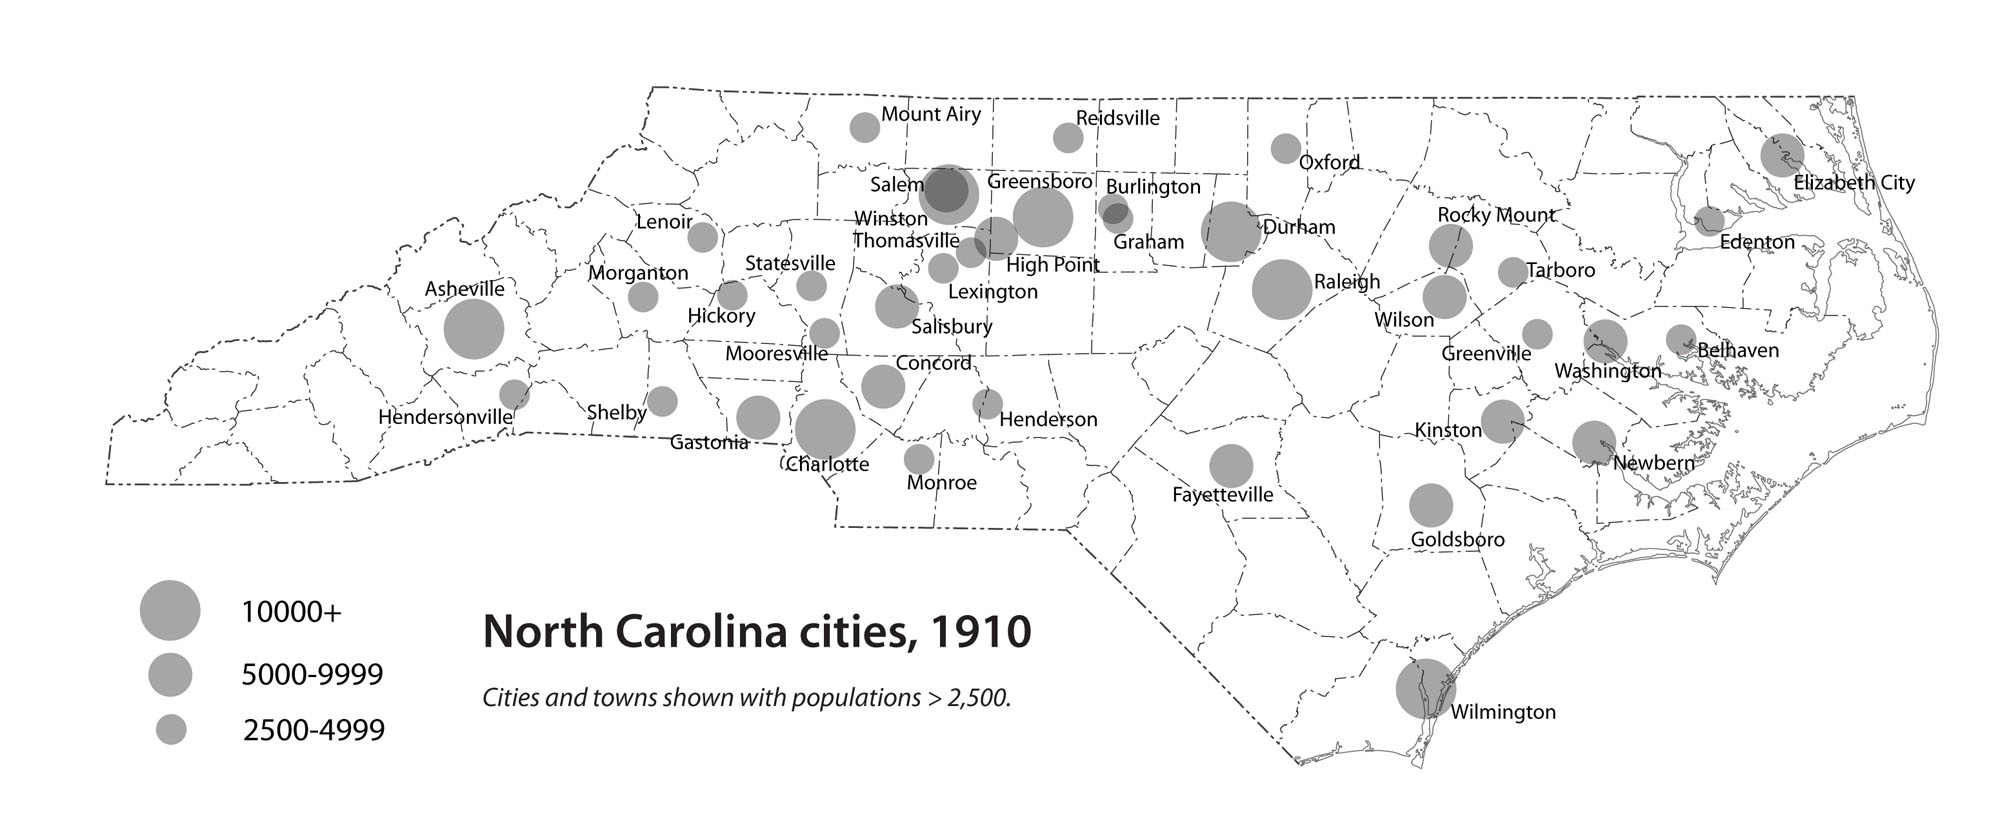 Map of North Carolina cities in 1910